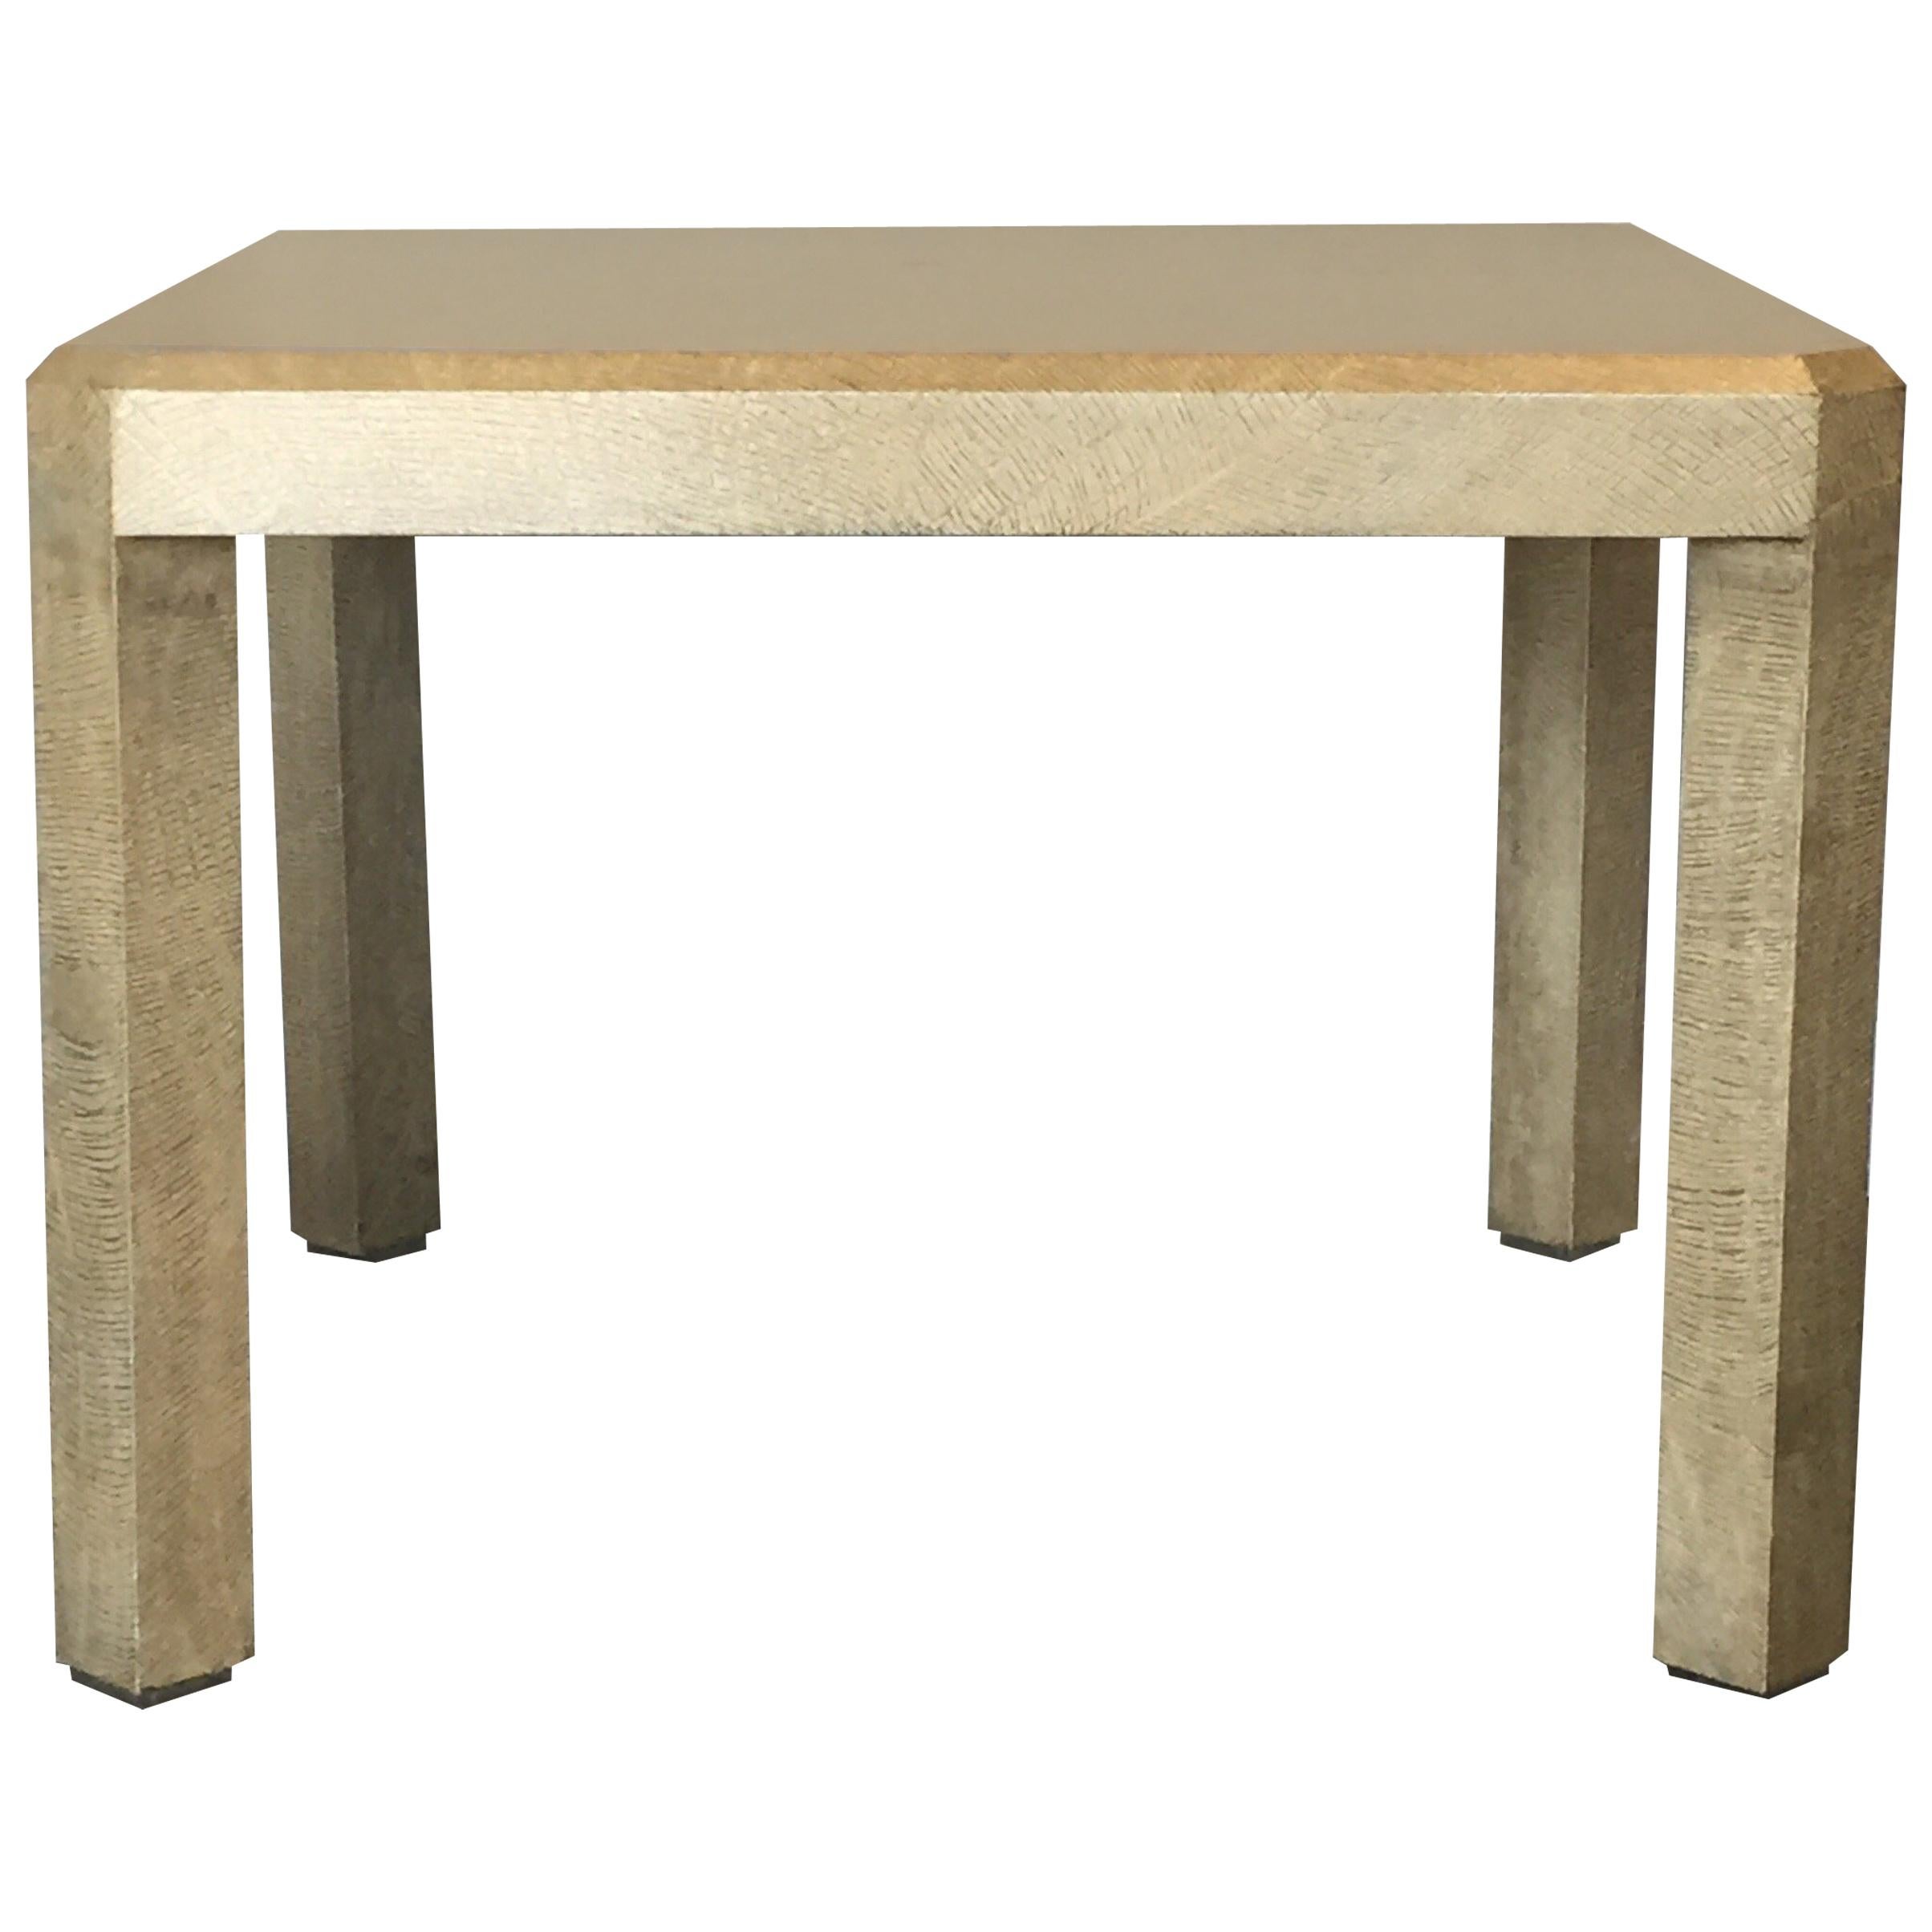 Cream Textured Parchment Clad Game Table by Karl Springer